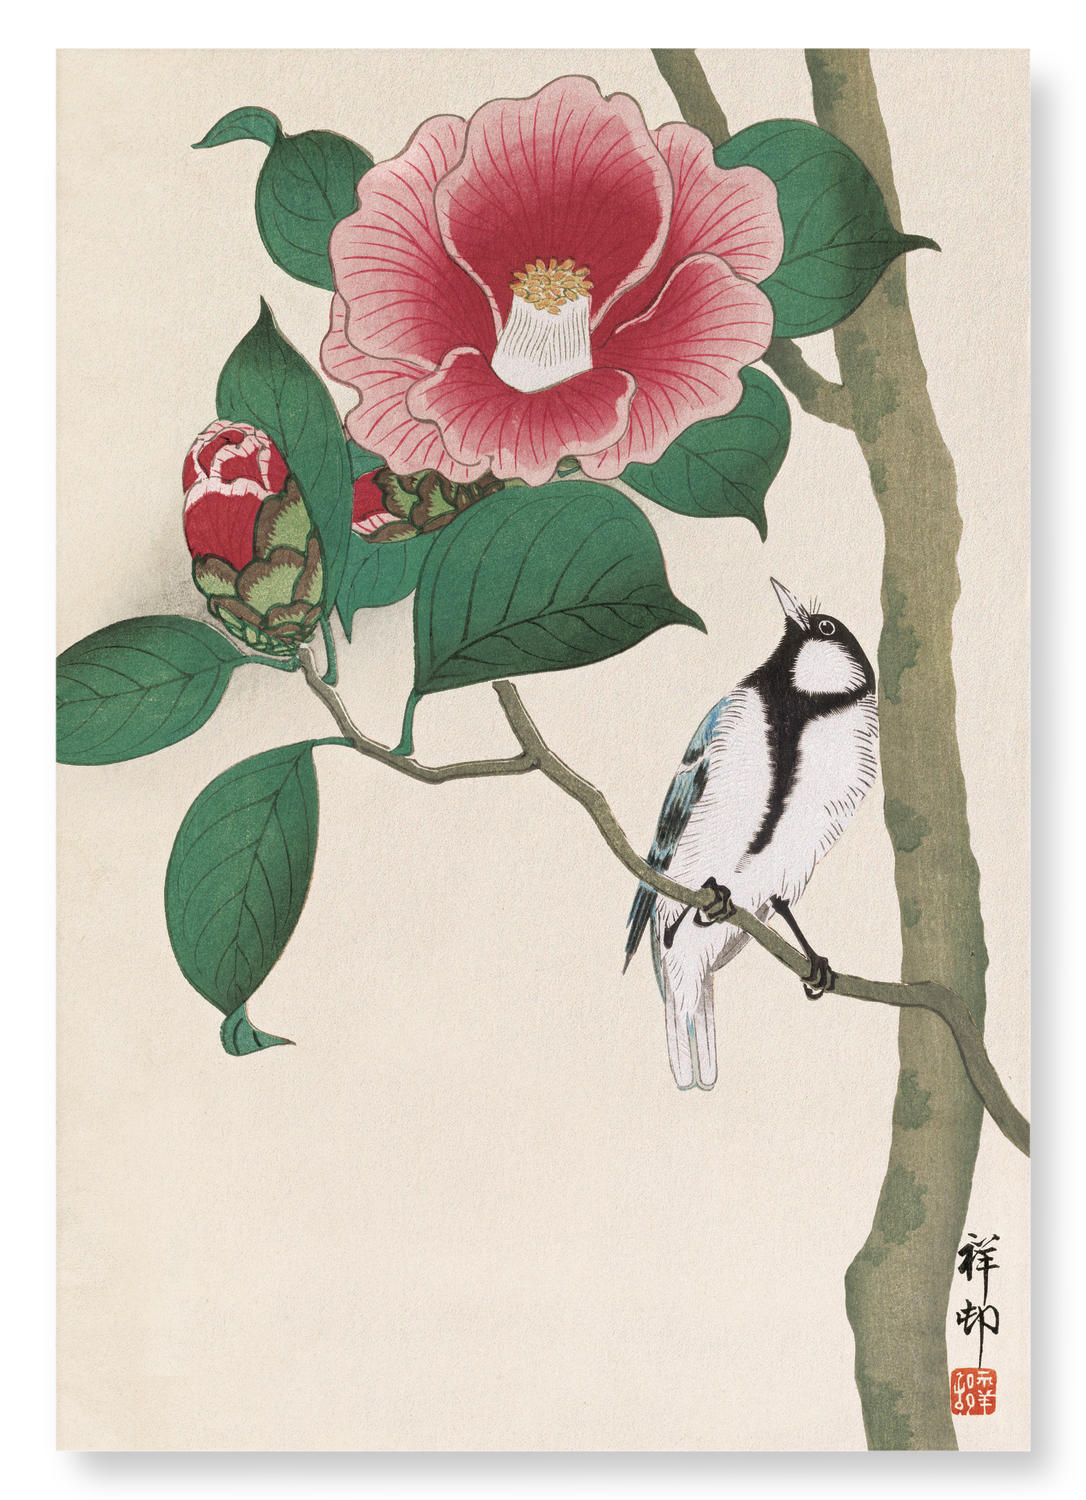 JAPANESE BUNTING AND CAMELLIA (C.1910): Japanese Art Print